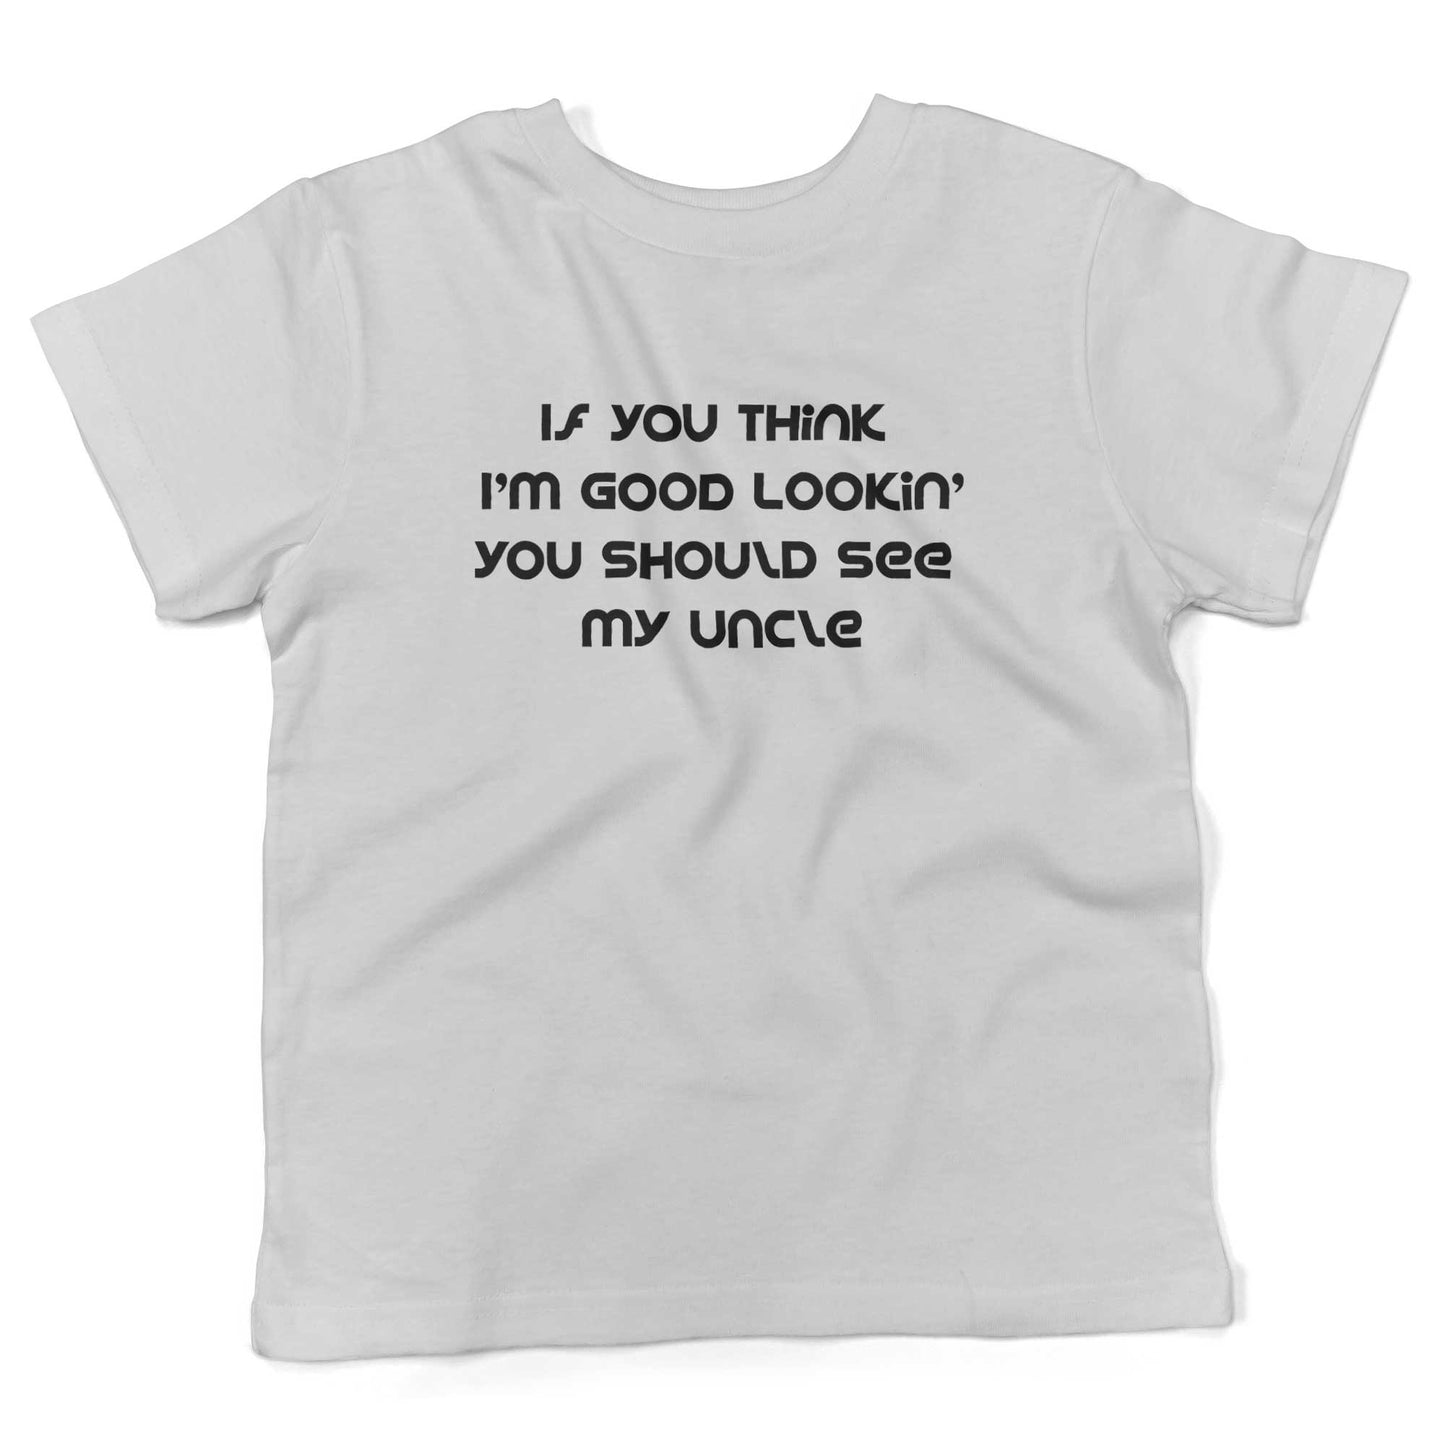 If You Think I'm Good Lookin' You Should See My Uncle Toddler Shirt-White-2T